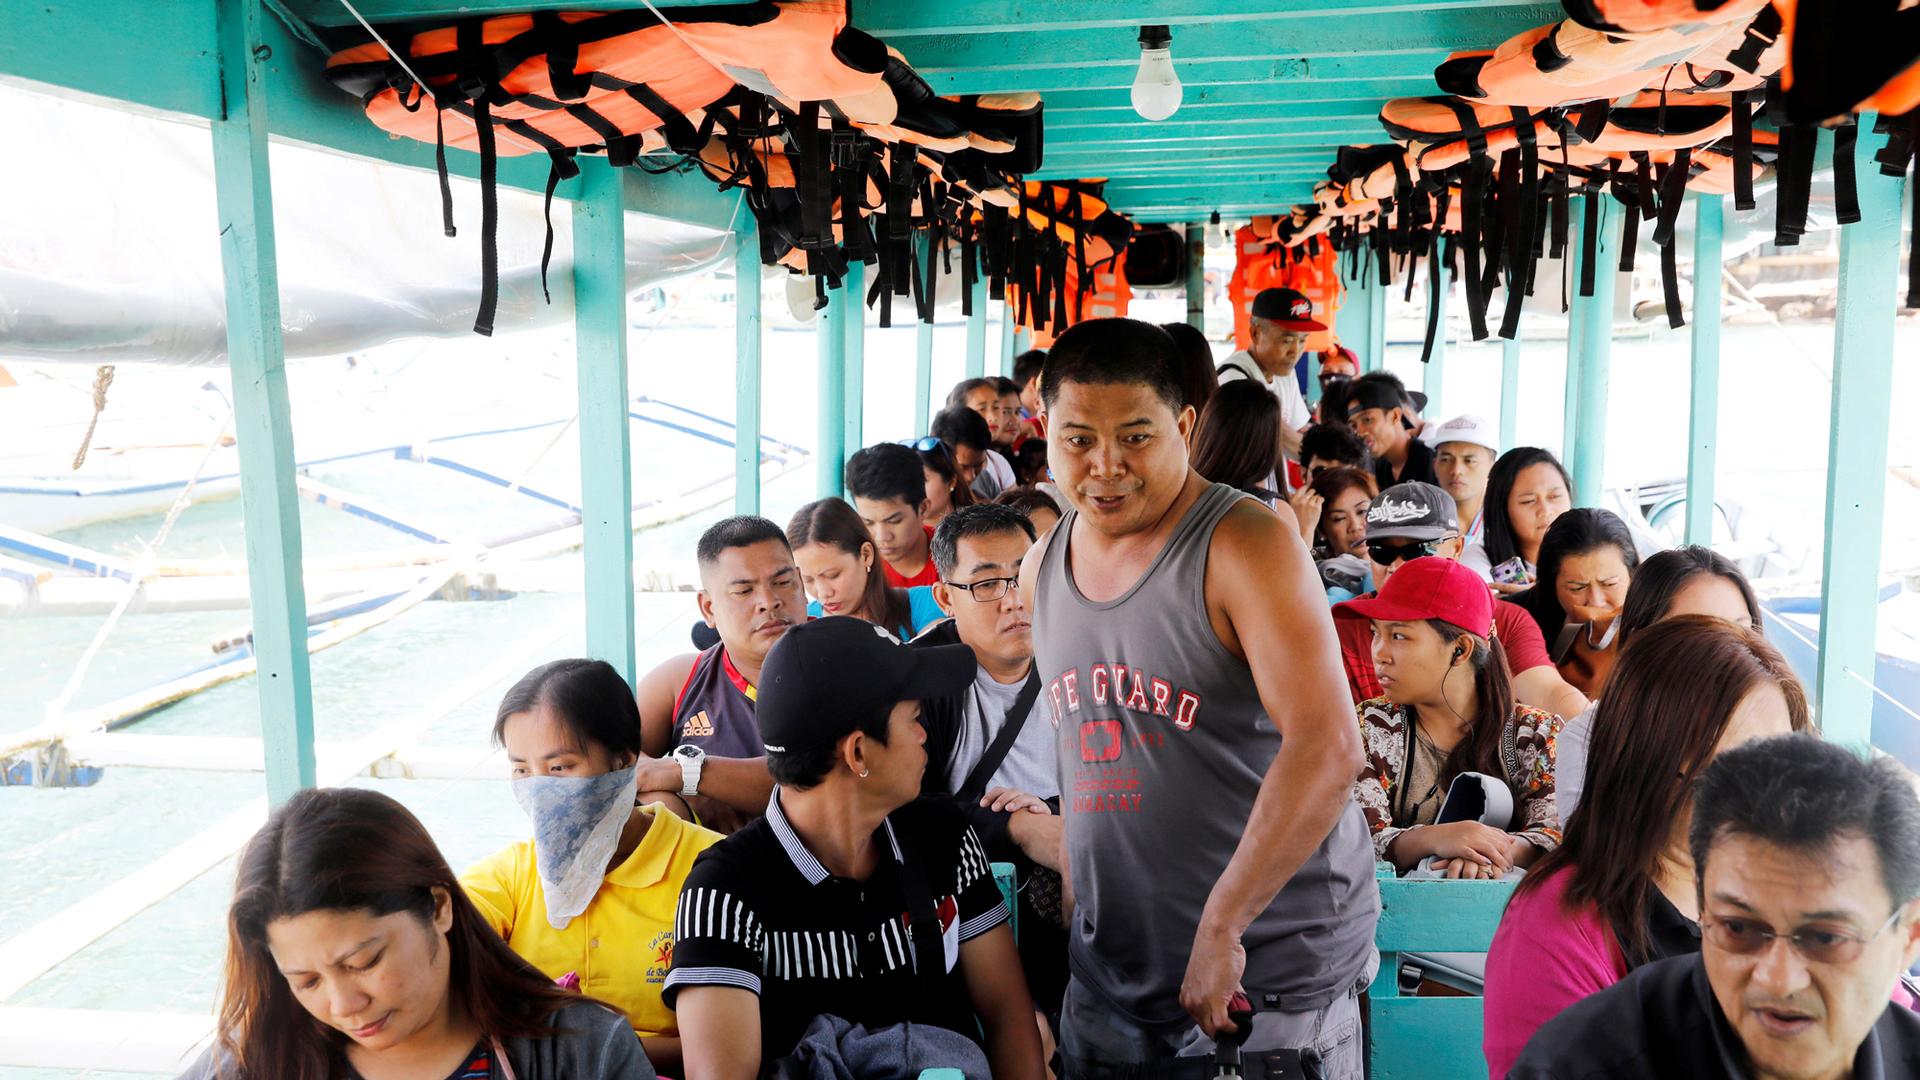 A man walks between seats of a motorboat filled with tourists. Overhead are bright orange life vests.